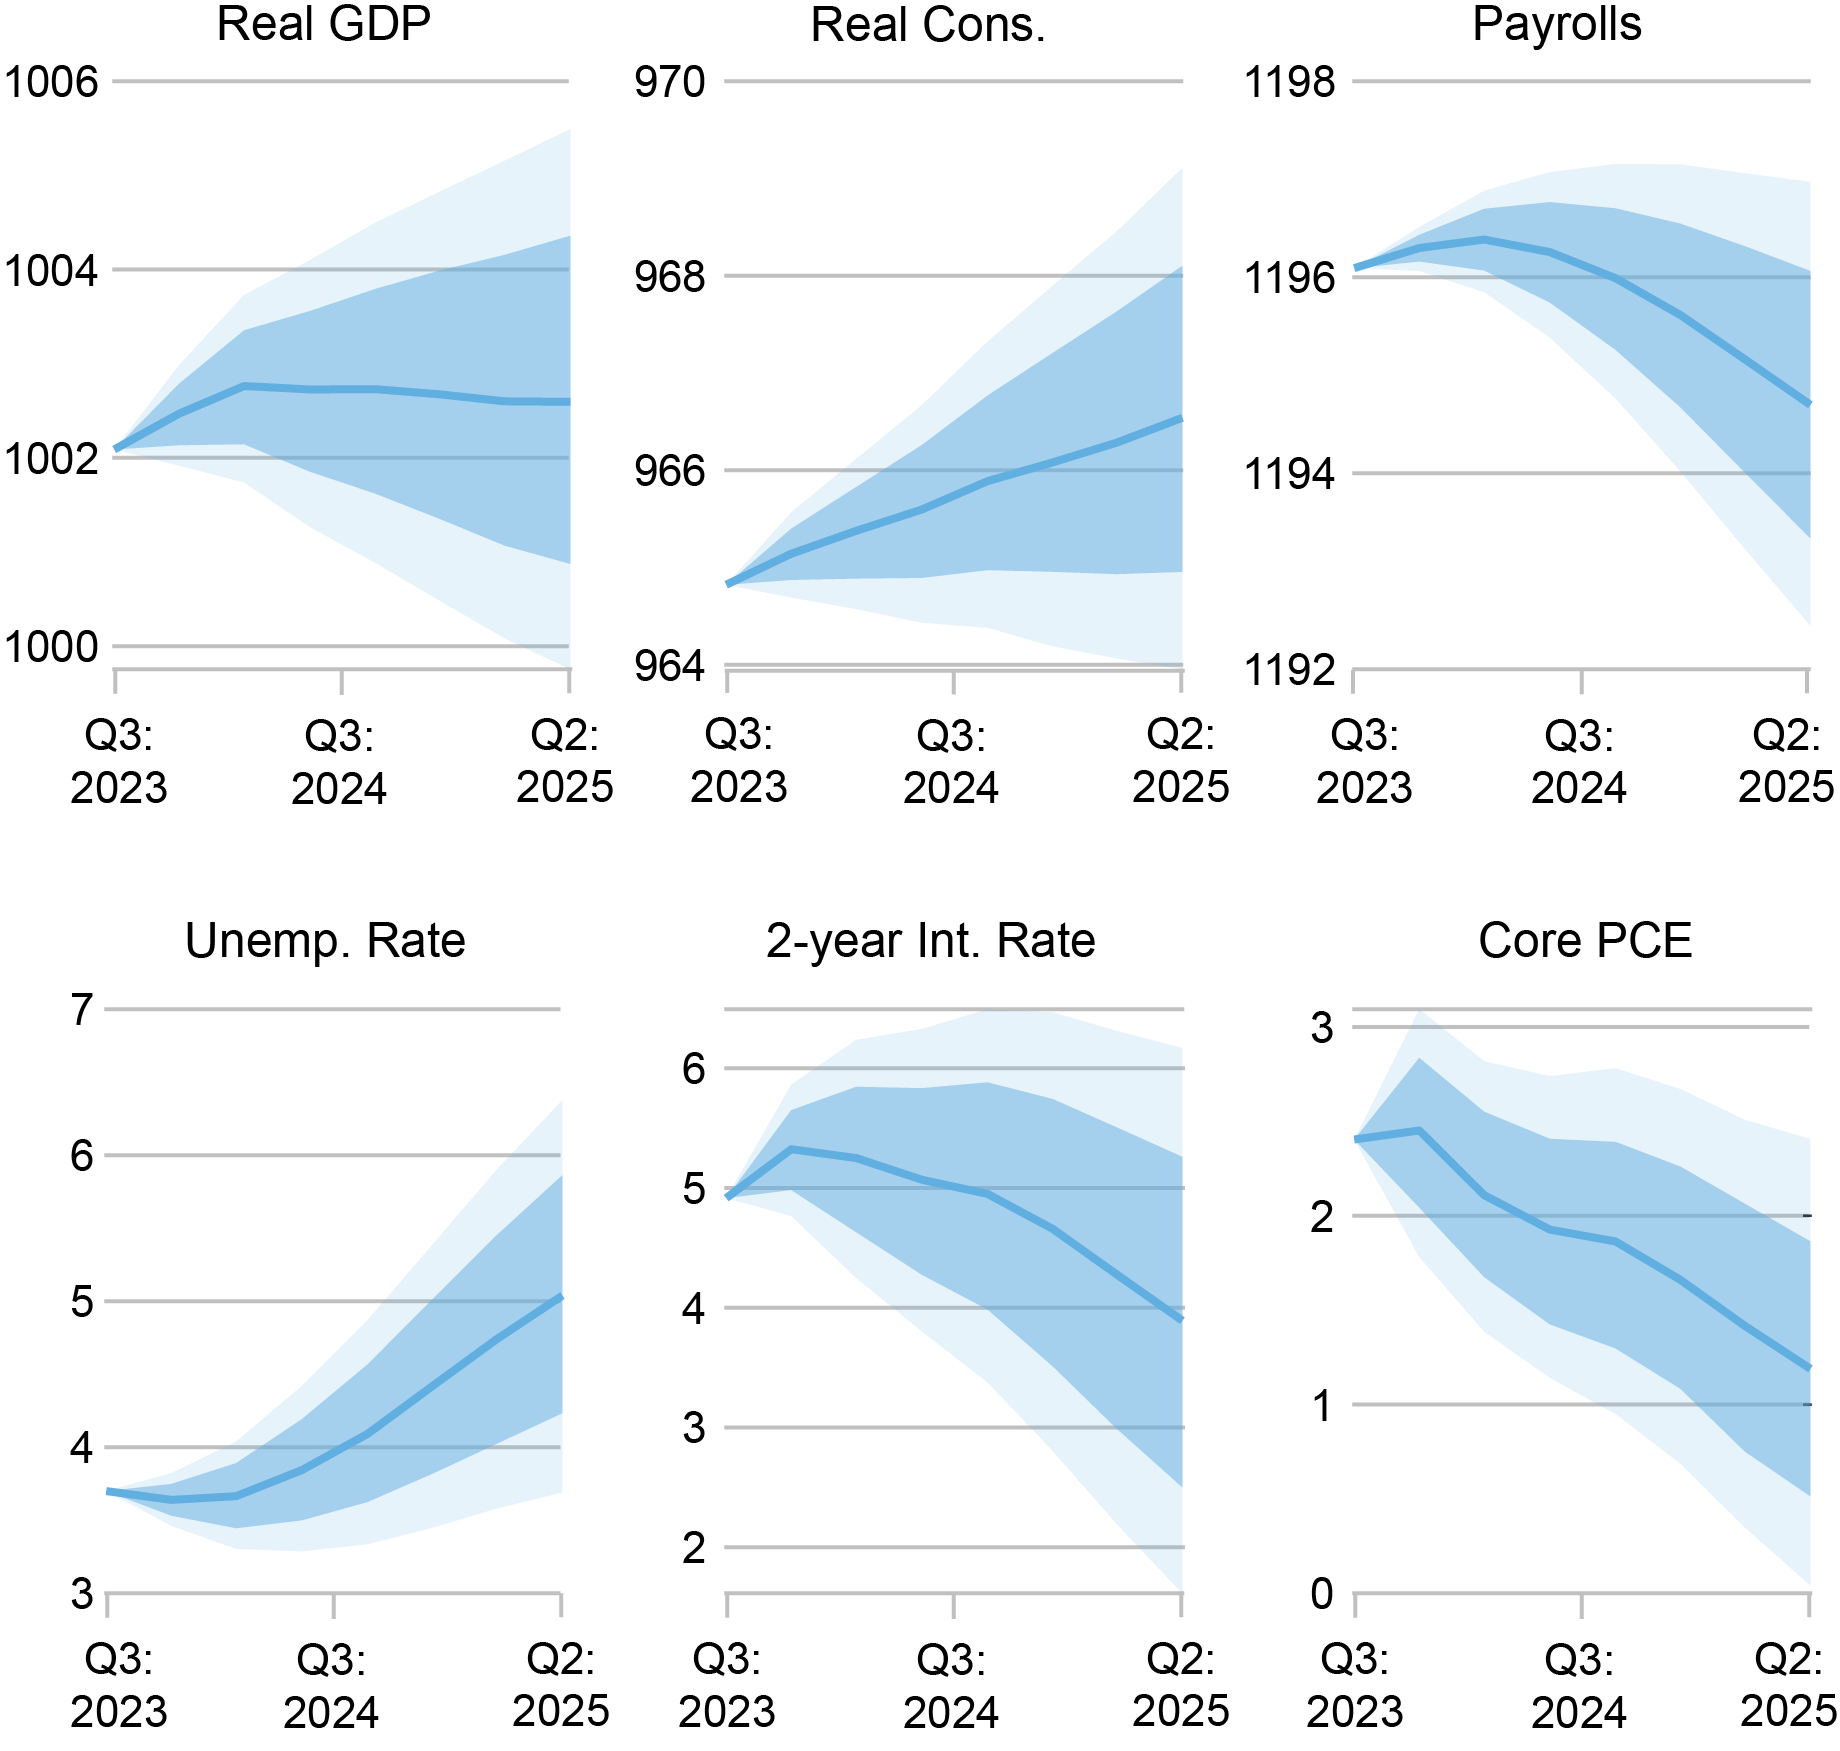 Six Liberty Street Economics line charts showing the Bayesian vector autoregressive model’s current forecasts for real gross domestic product, real personal consumption expenditures, and payroll employment (top three charts) and for unemployment rate, two-year nominal interest rate, and core PCE rate (bottom three charts). The forecasts are based on data available up to the third quarter of 2023.